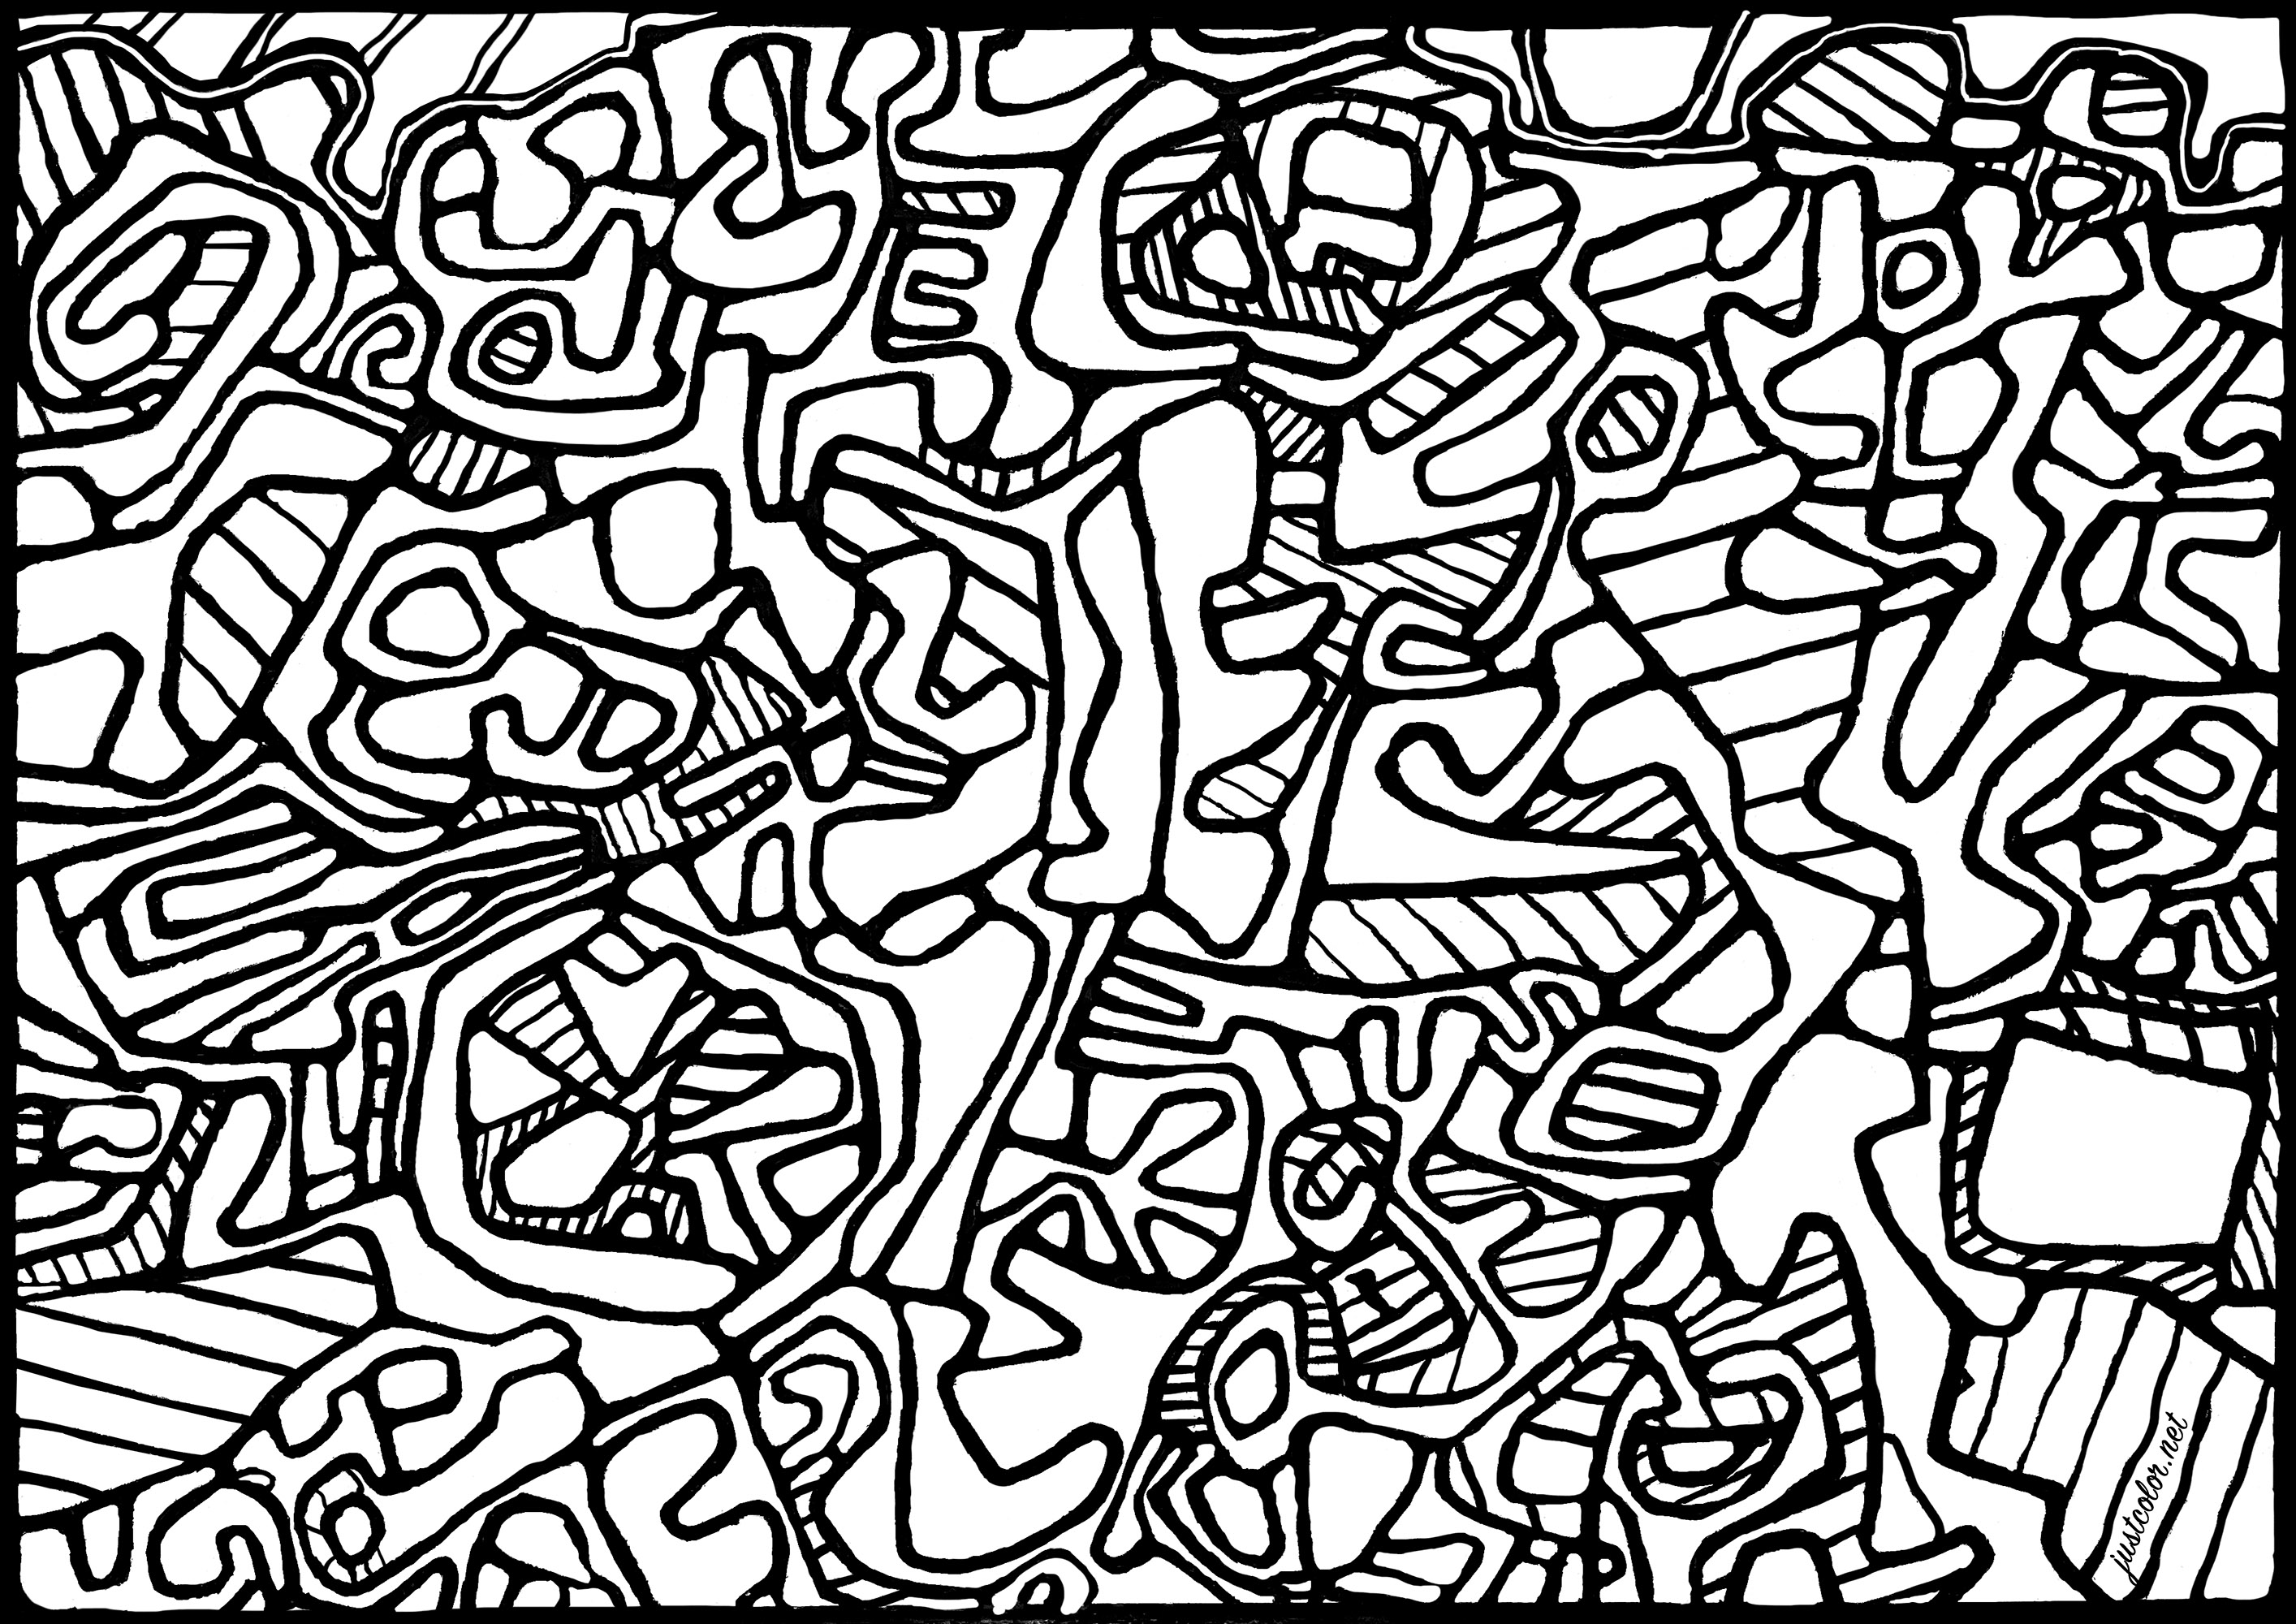 Coloring based on the painting 'Jardin L'Hourloupe' by Jean Dubuffet (1966). Jean Dubuffet began his career painting landscapes and portraits. Interested in the free, instinctive expression of the untrained artist, he founded the Art Brut movement and created many works in this aesthetic, using materials such as concrete and earth. He also developed the concept of 'Hourloupe', a fantastic universe populated by strange, grotesque characters. Dubuffet was also a passionate collector of art brut, and created an important collection that has been exhibited worldwide.